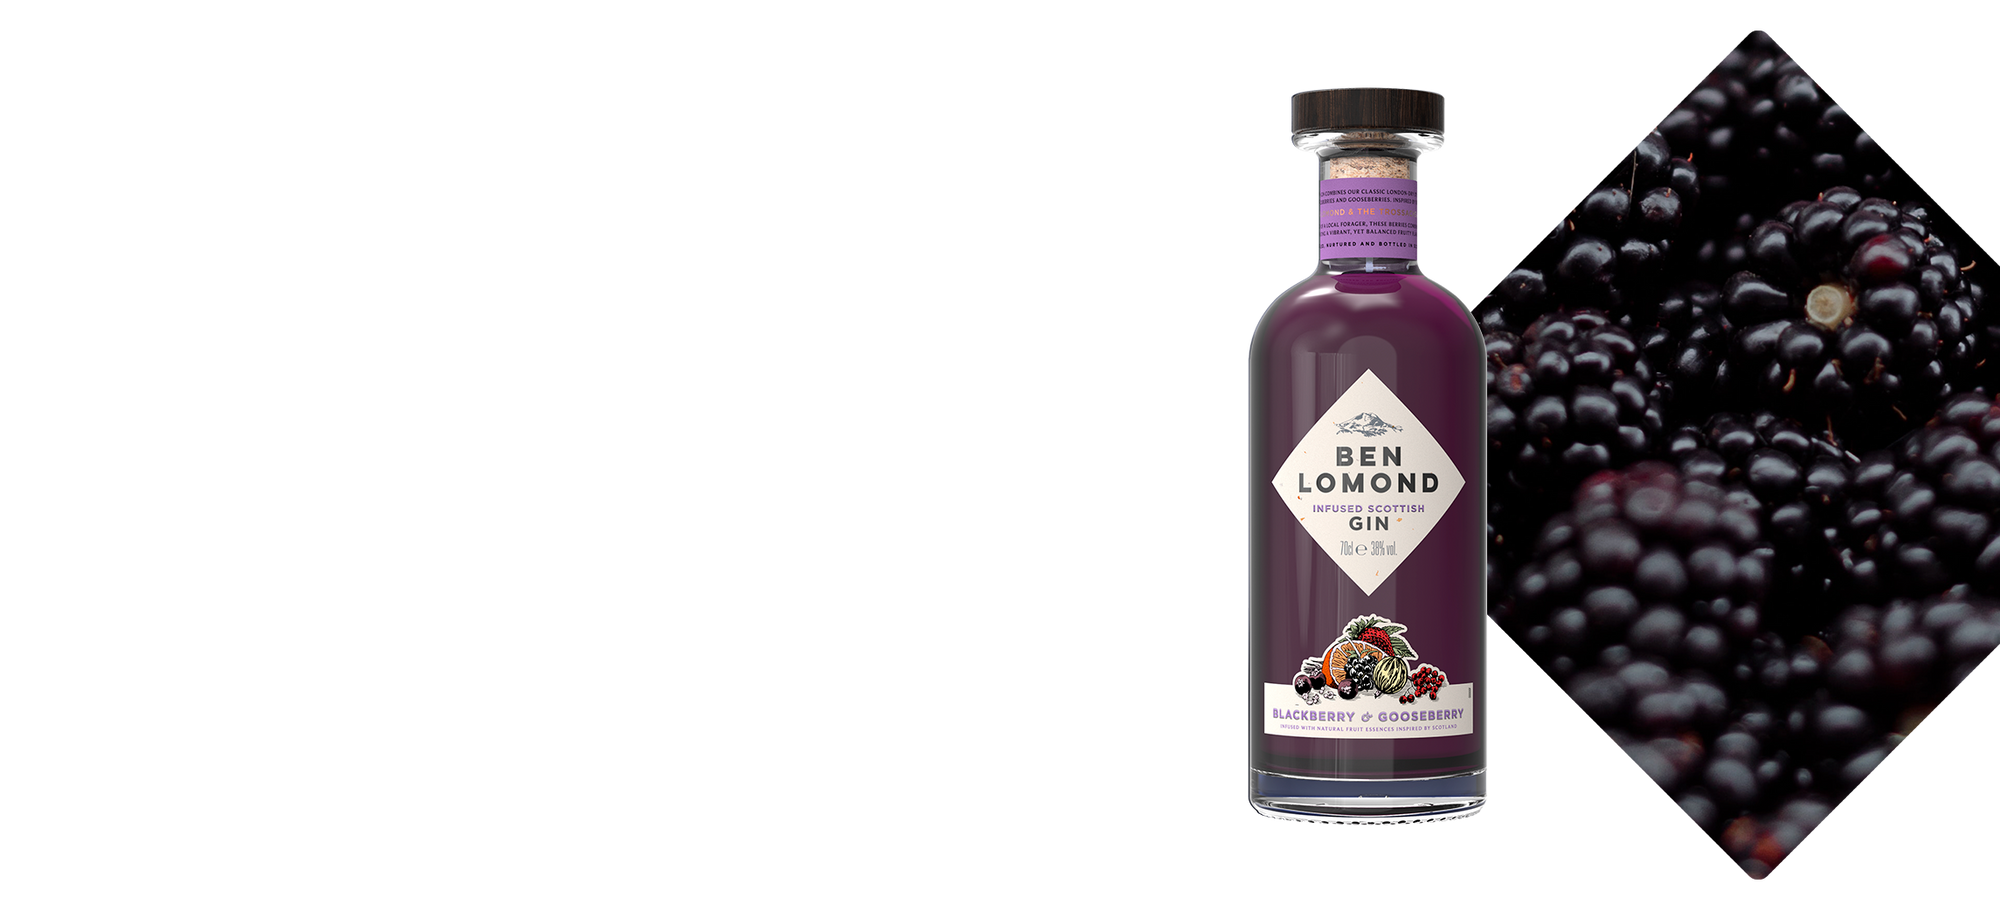 Blackberry and gooseberry gin